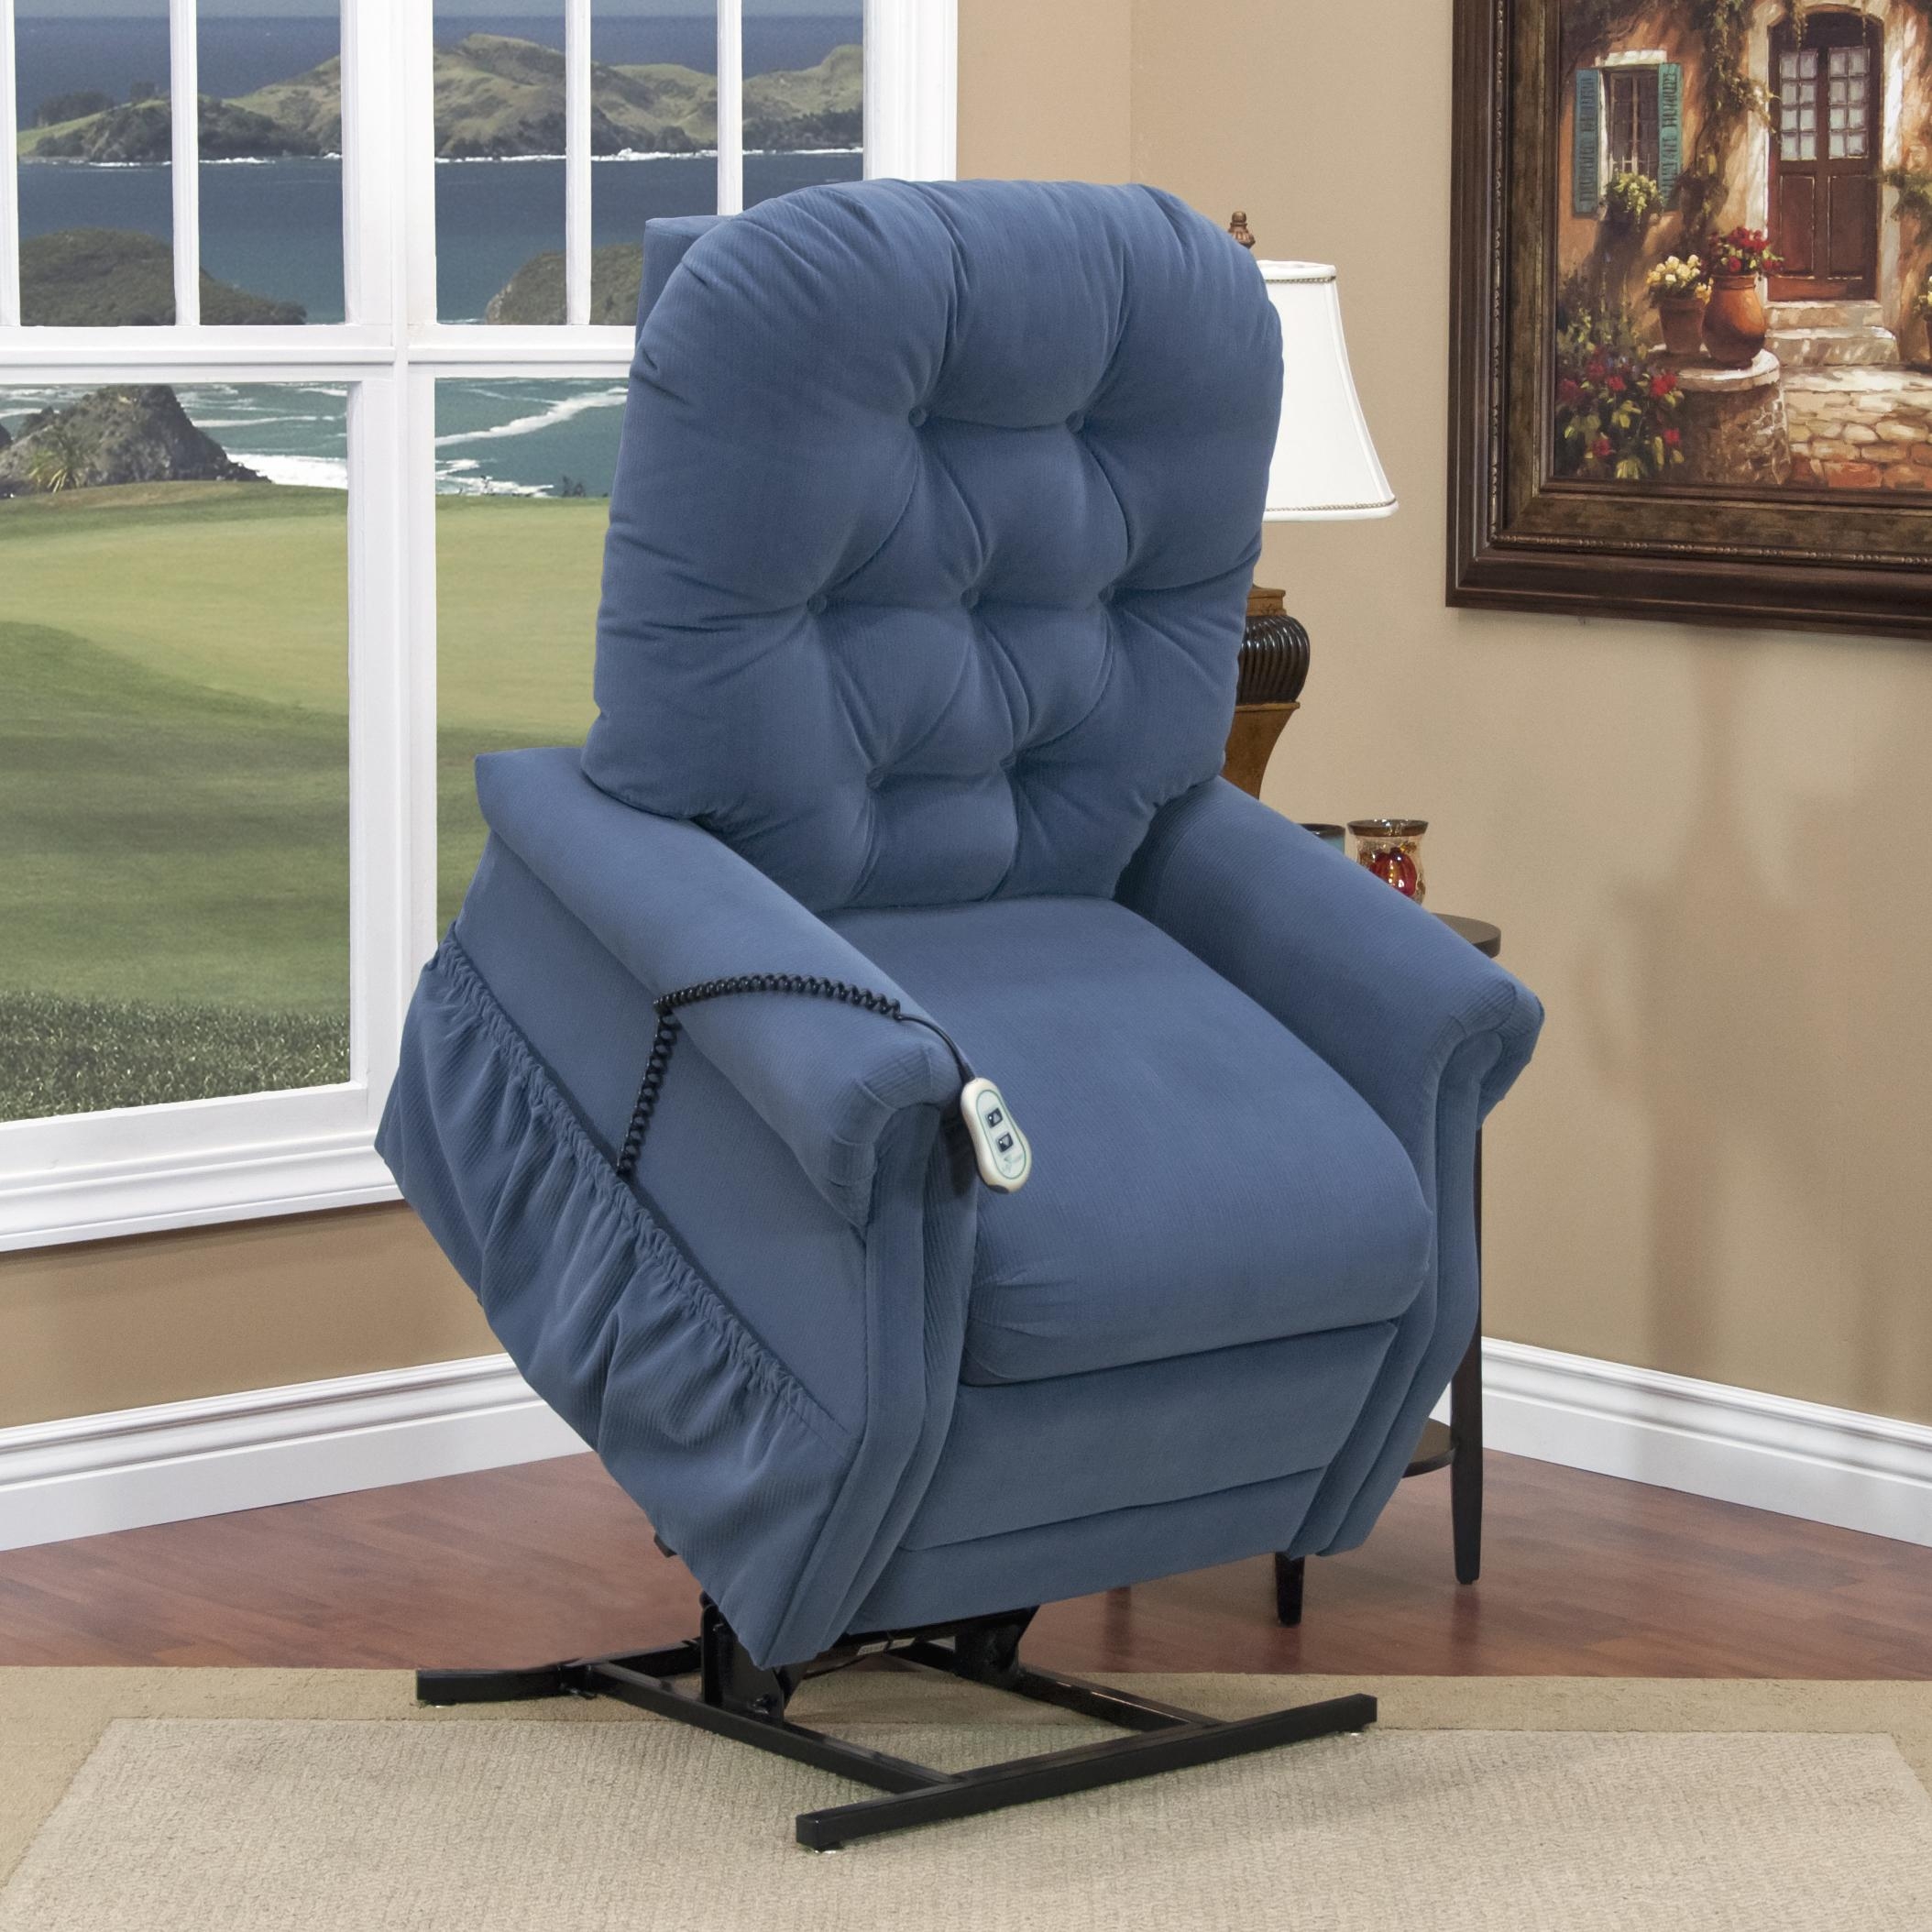 25 Series 3 Position Lift Chair